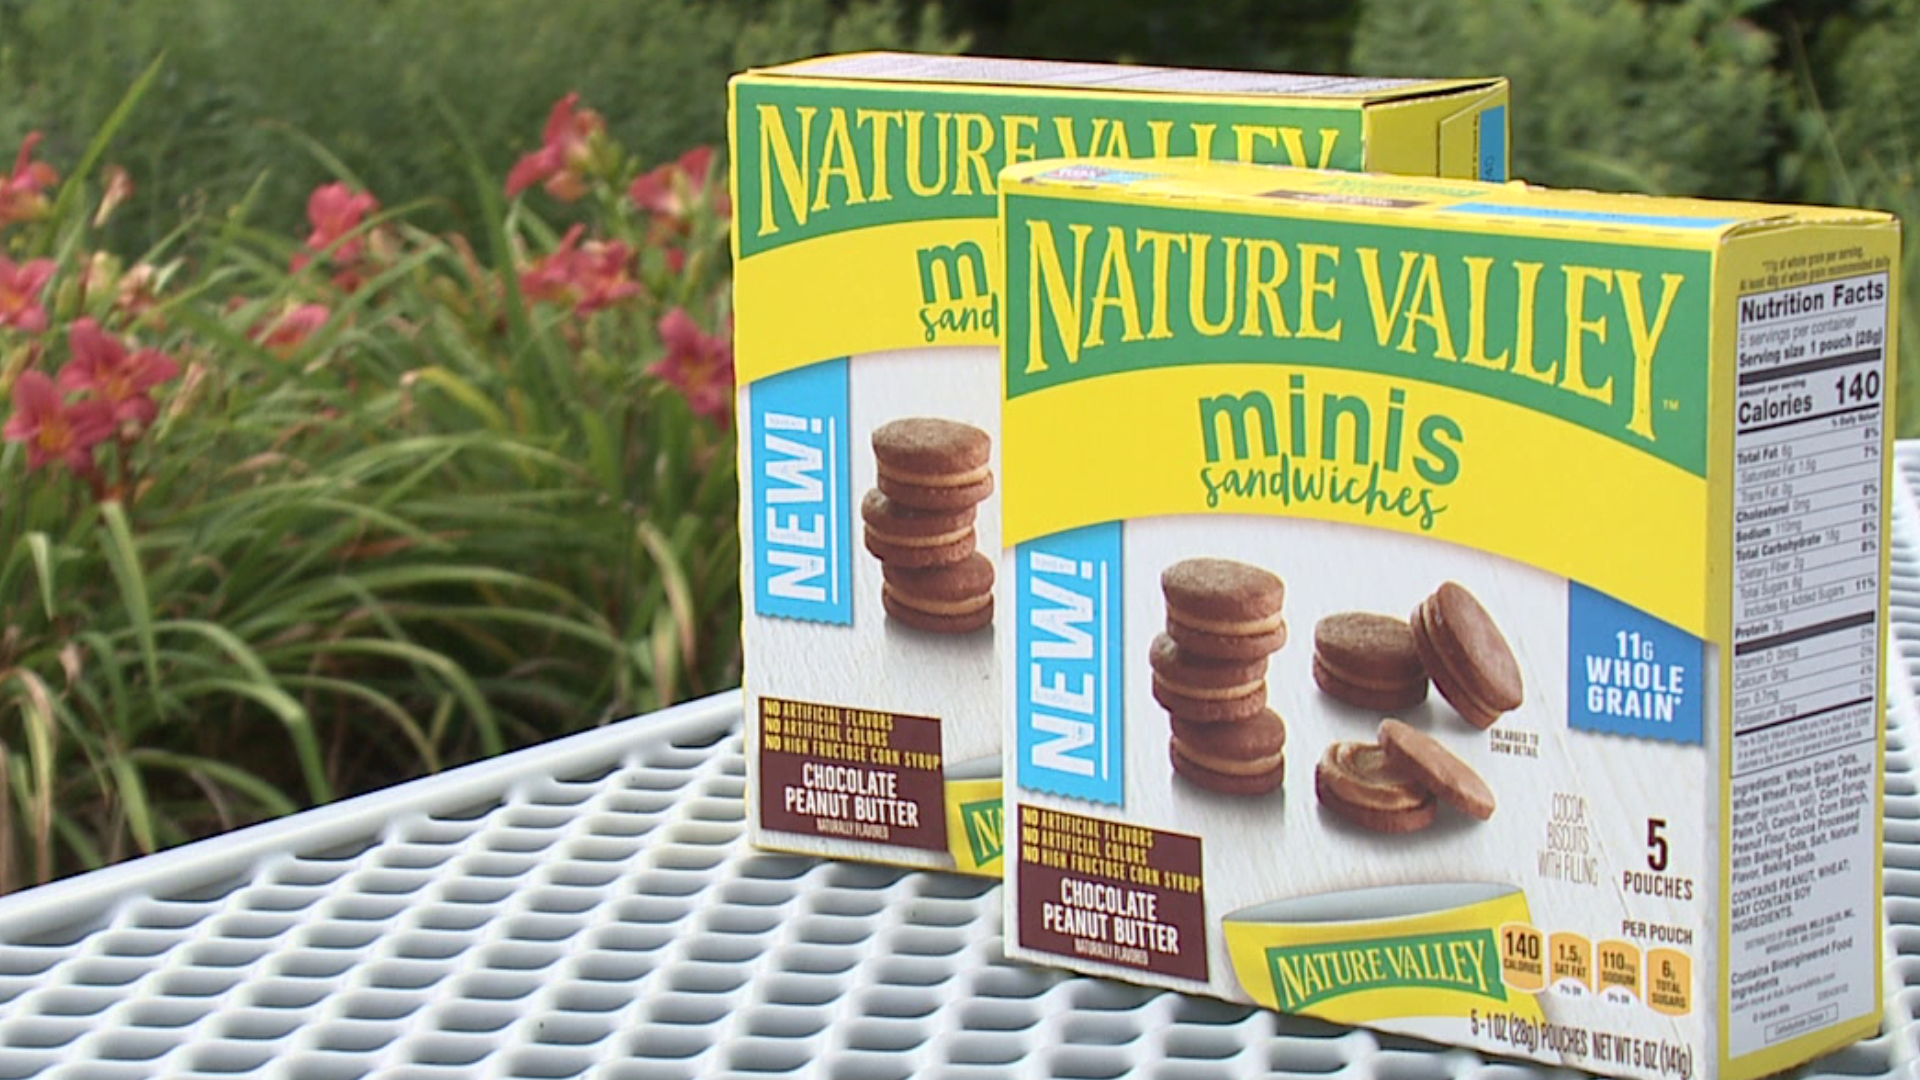 Known for creating treats meant to be eaten outside, Nature Valley has introduced a new snack in the form of a mini sandwich.